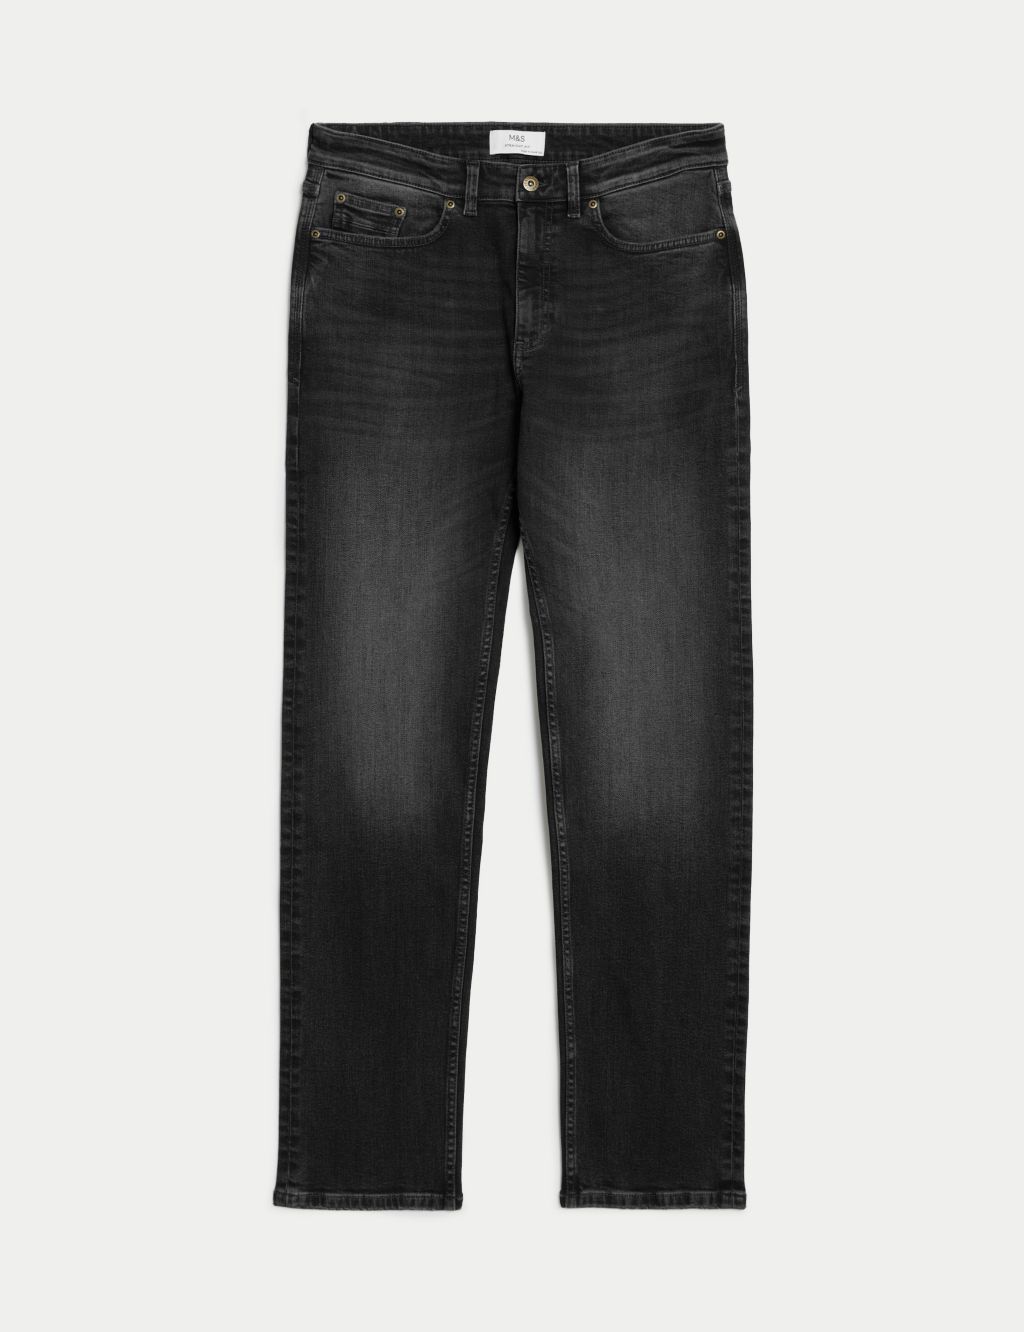 Straight Fit Vintage Wash Stretch Jeans image 2